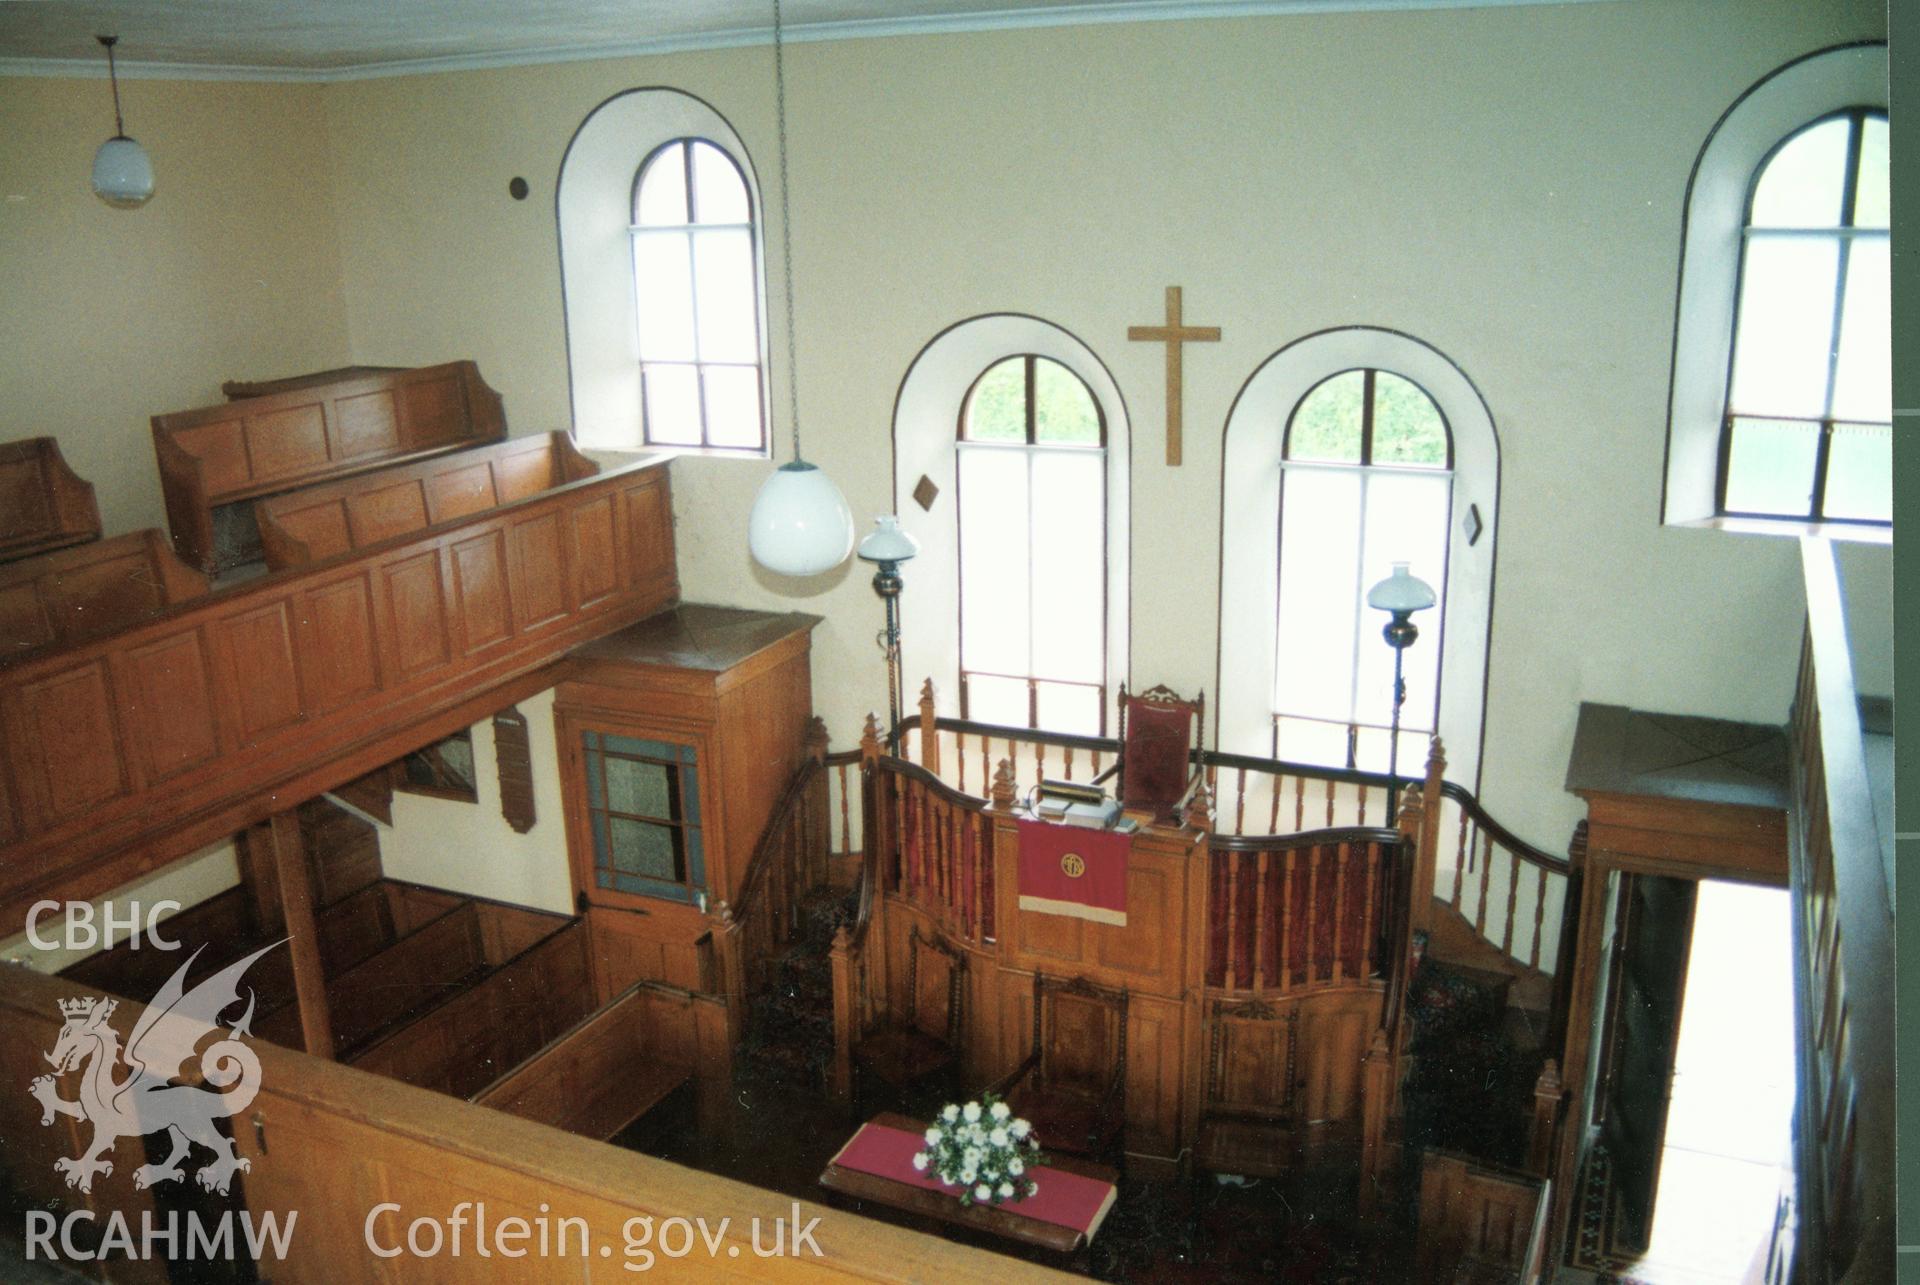 Digital copy of a colour photograph showing an interior view of Carvan Independent Chapel, Lampeter Velfrey, taken by Robert Scourfield, 1996.